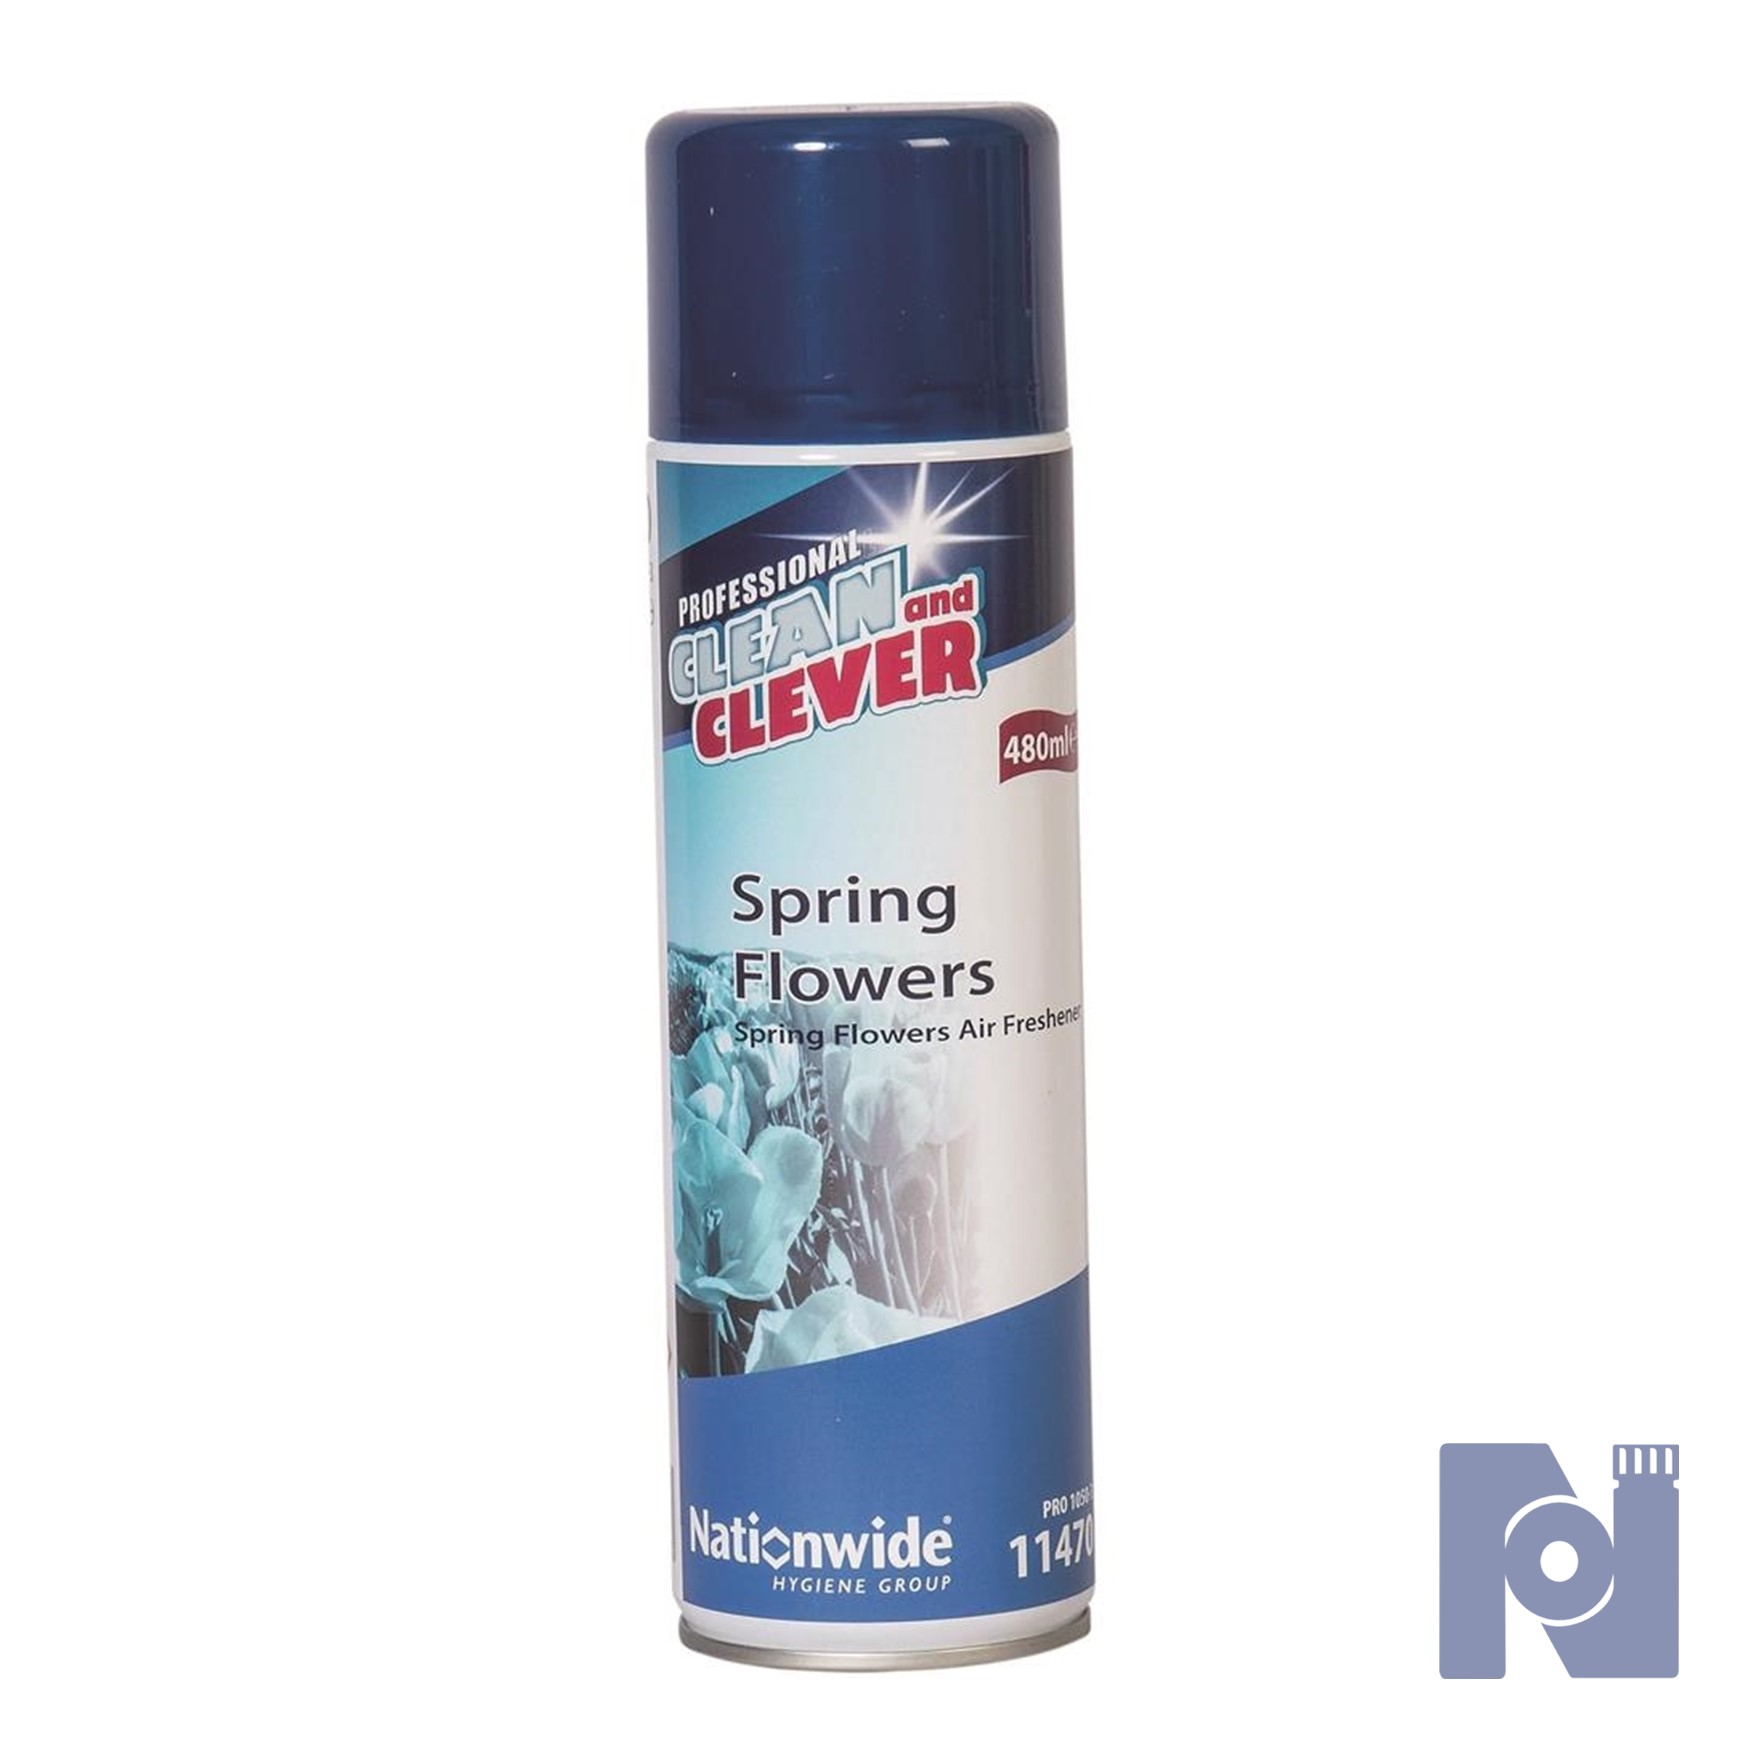 Clean & Clever Spring Flowers Air Freshener